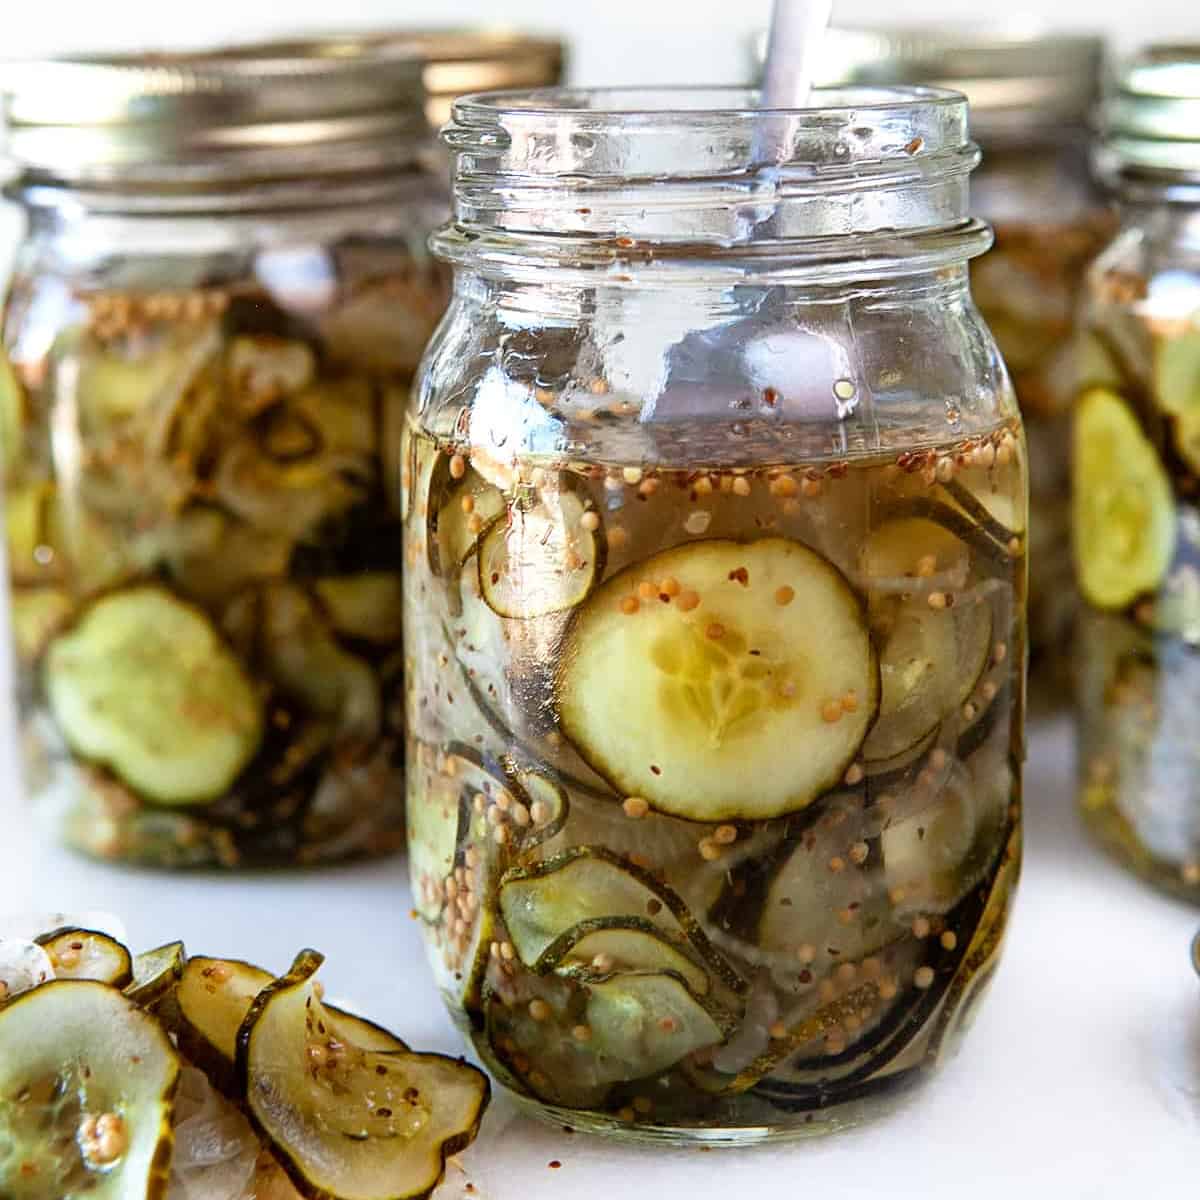 First jar is open with a fork and the rest are closed and filled with pickles